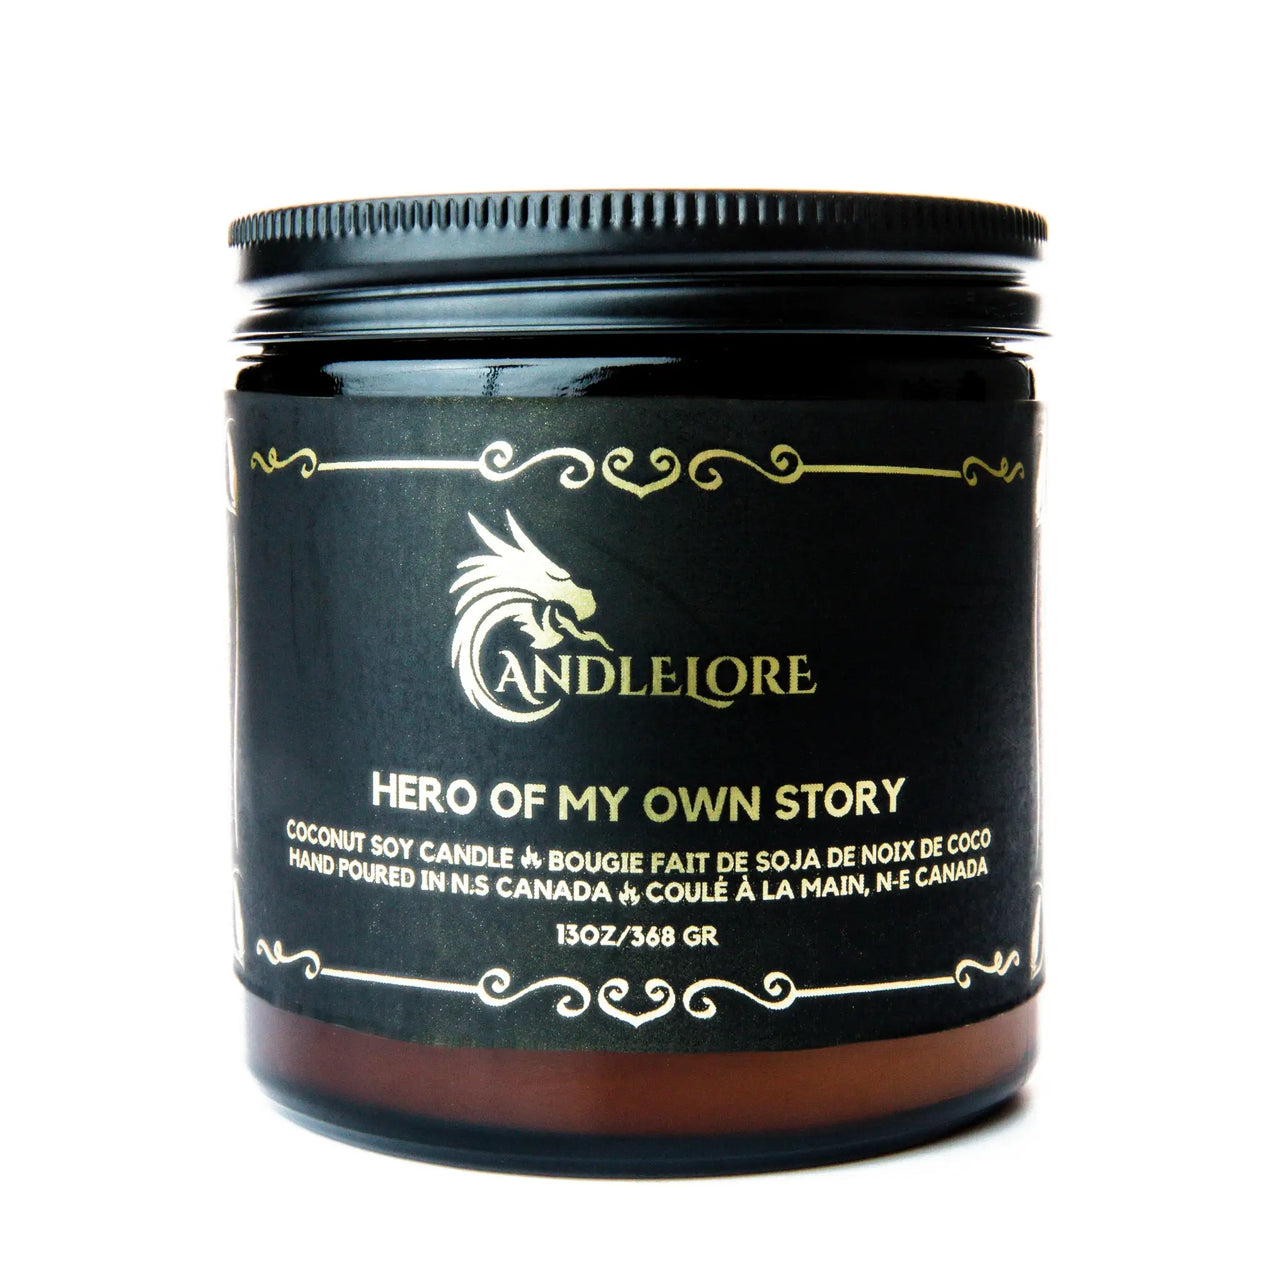 Large Hero of my own story candle